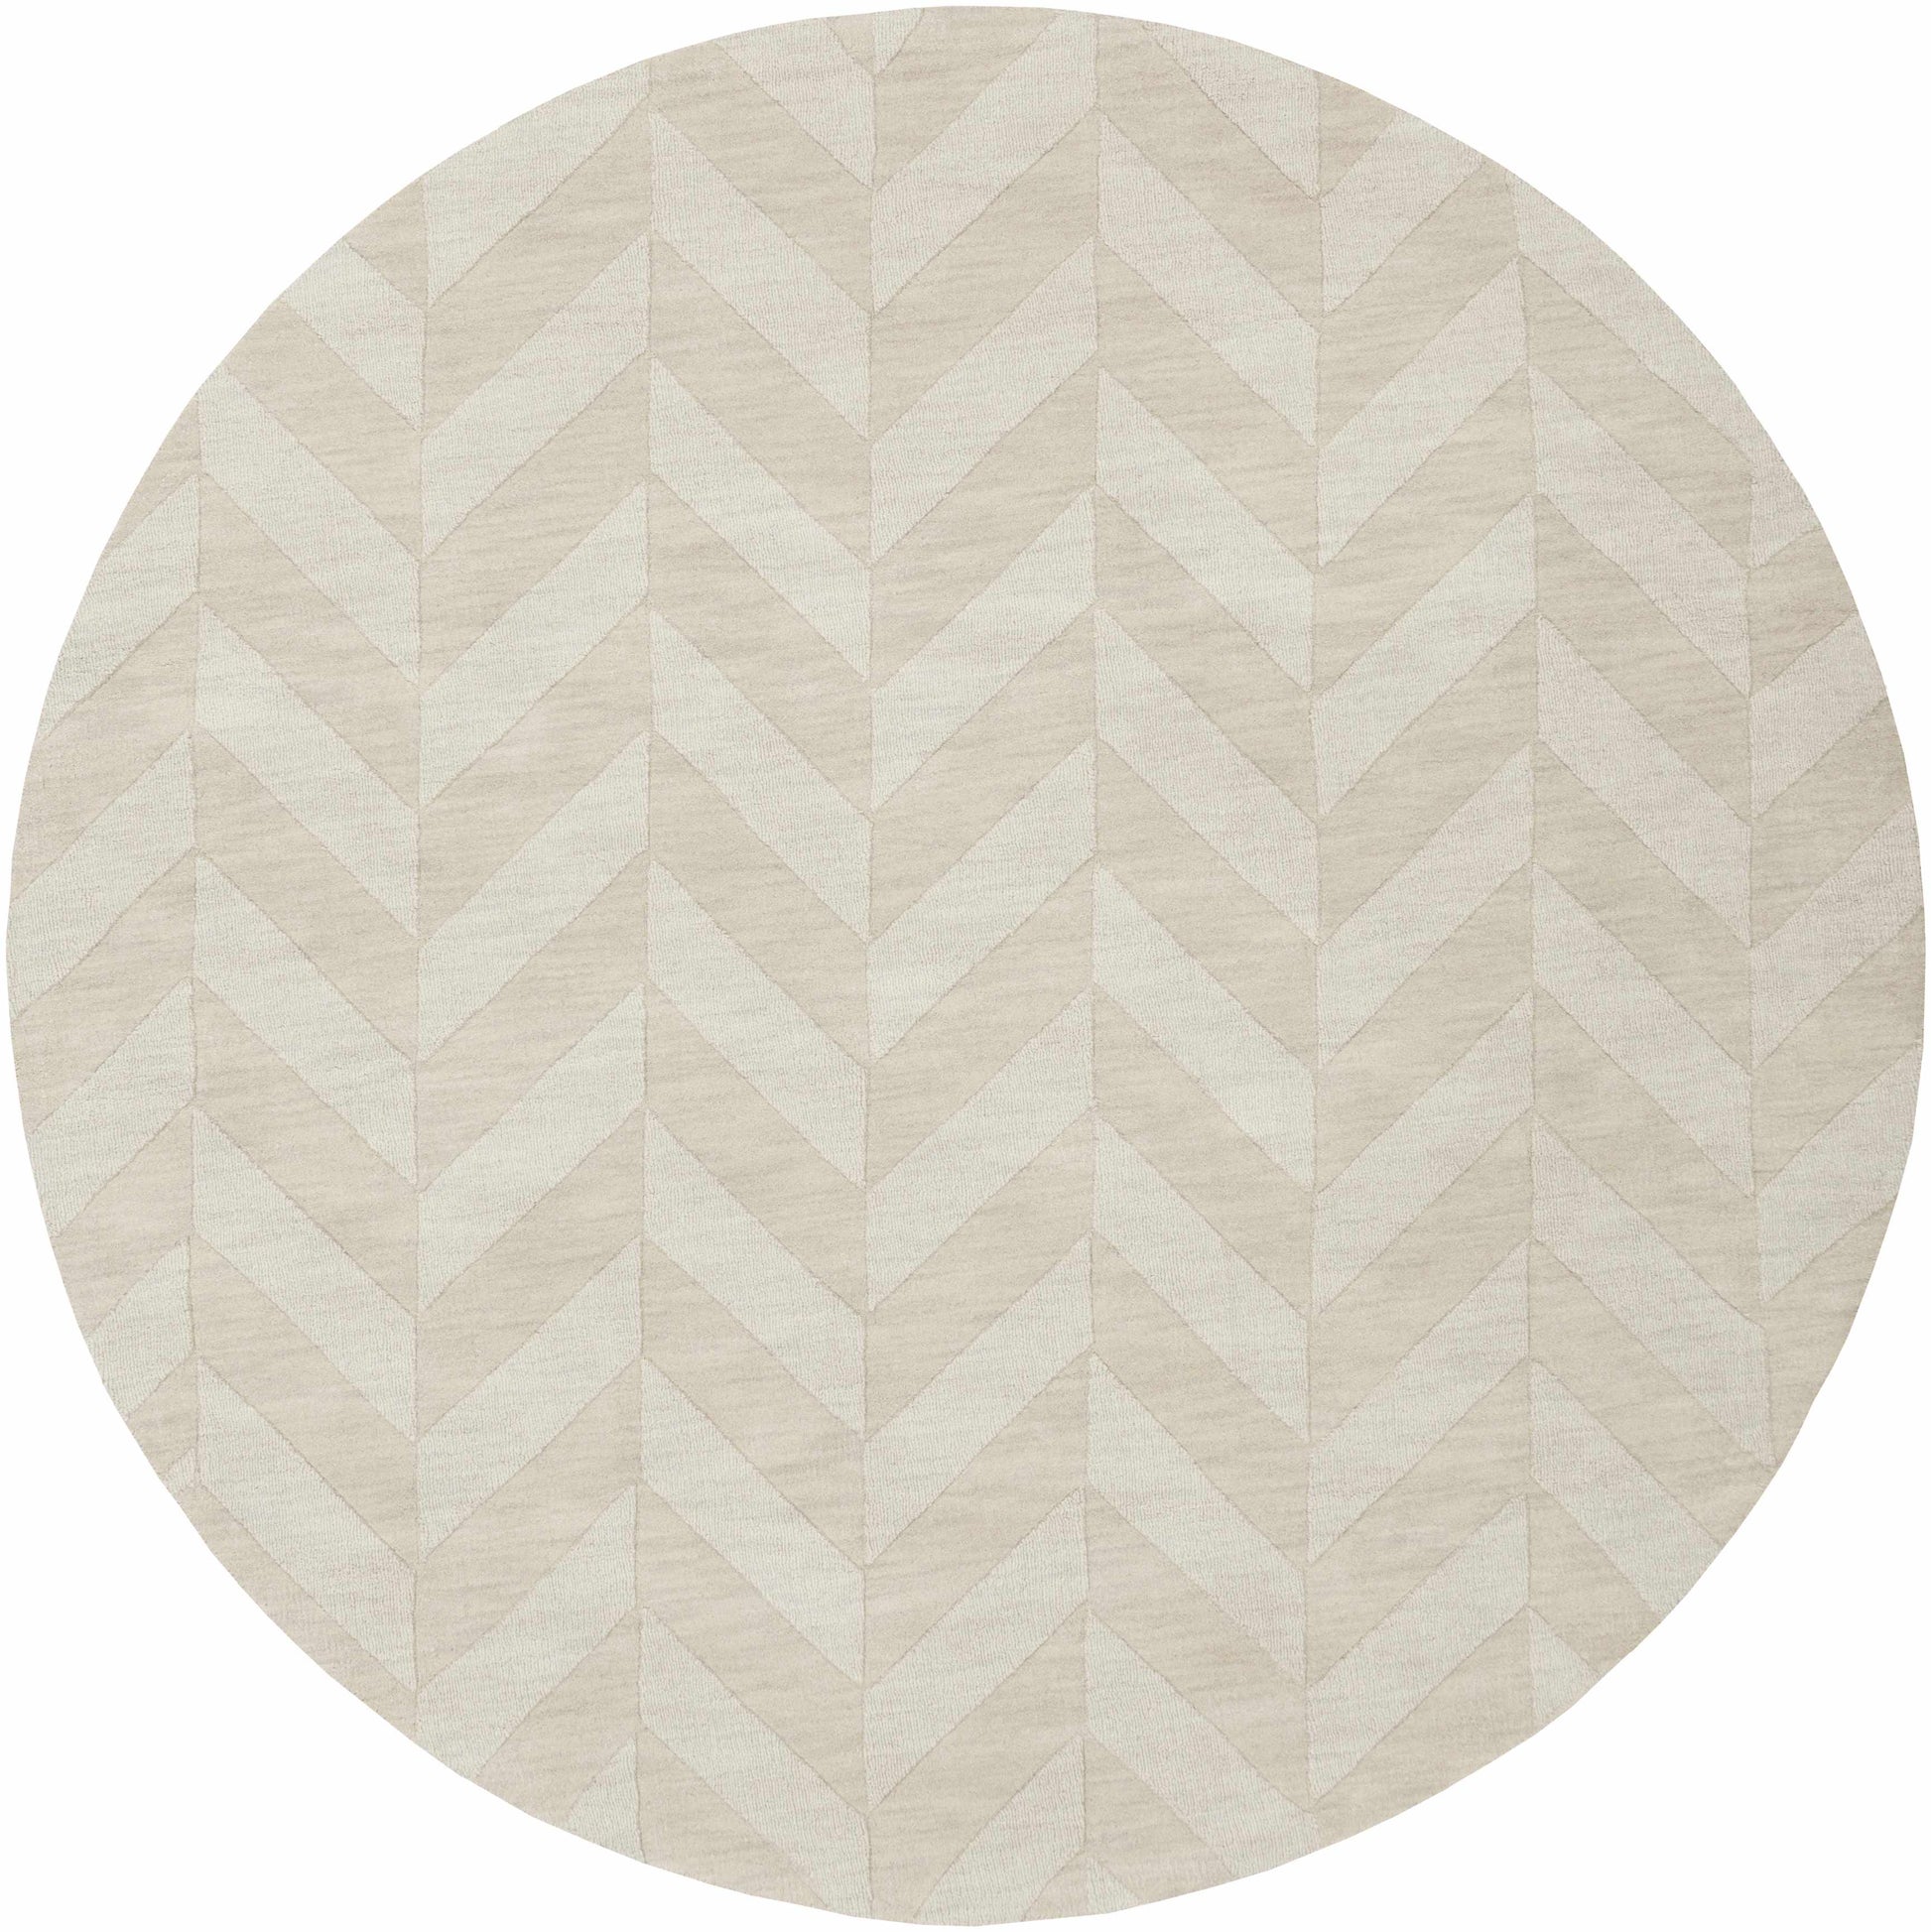 Boutique Rugs Rugs 7'9" Round Normalville Area Rug